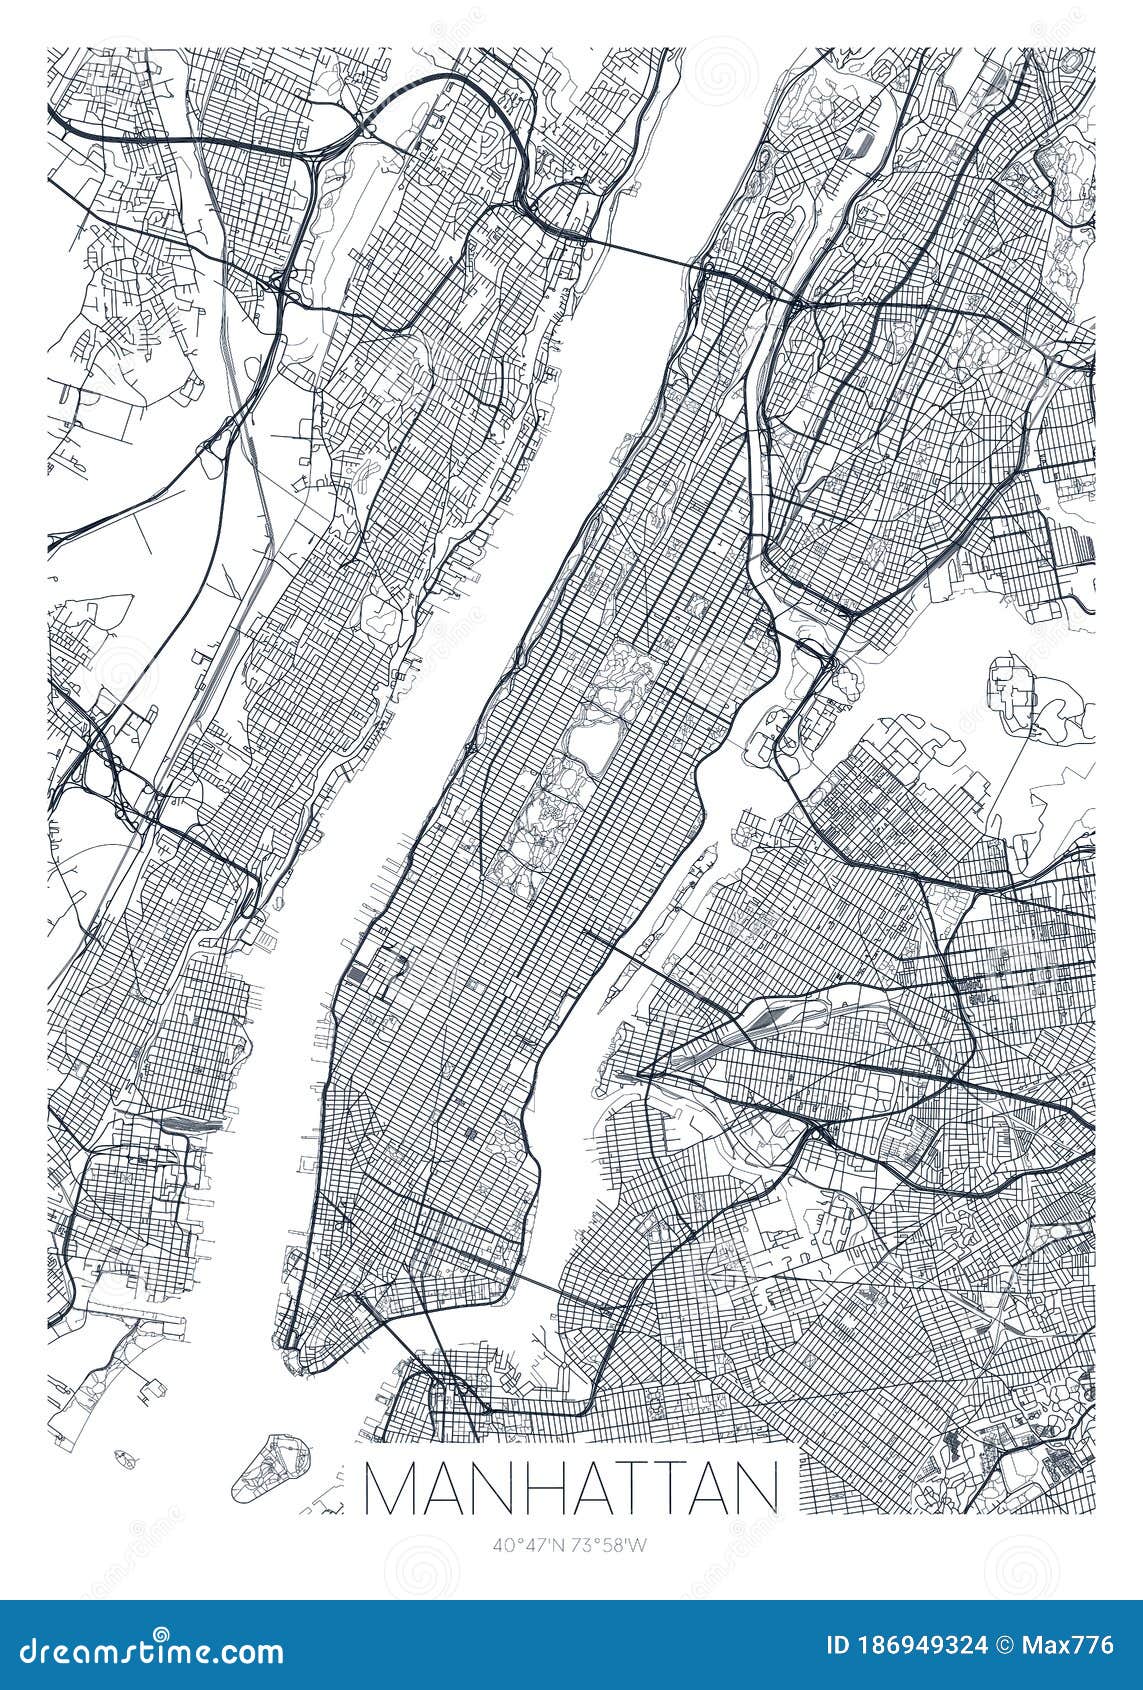 Detailed Borough Map Of Manhattan New York City Vector Poster Or